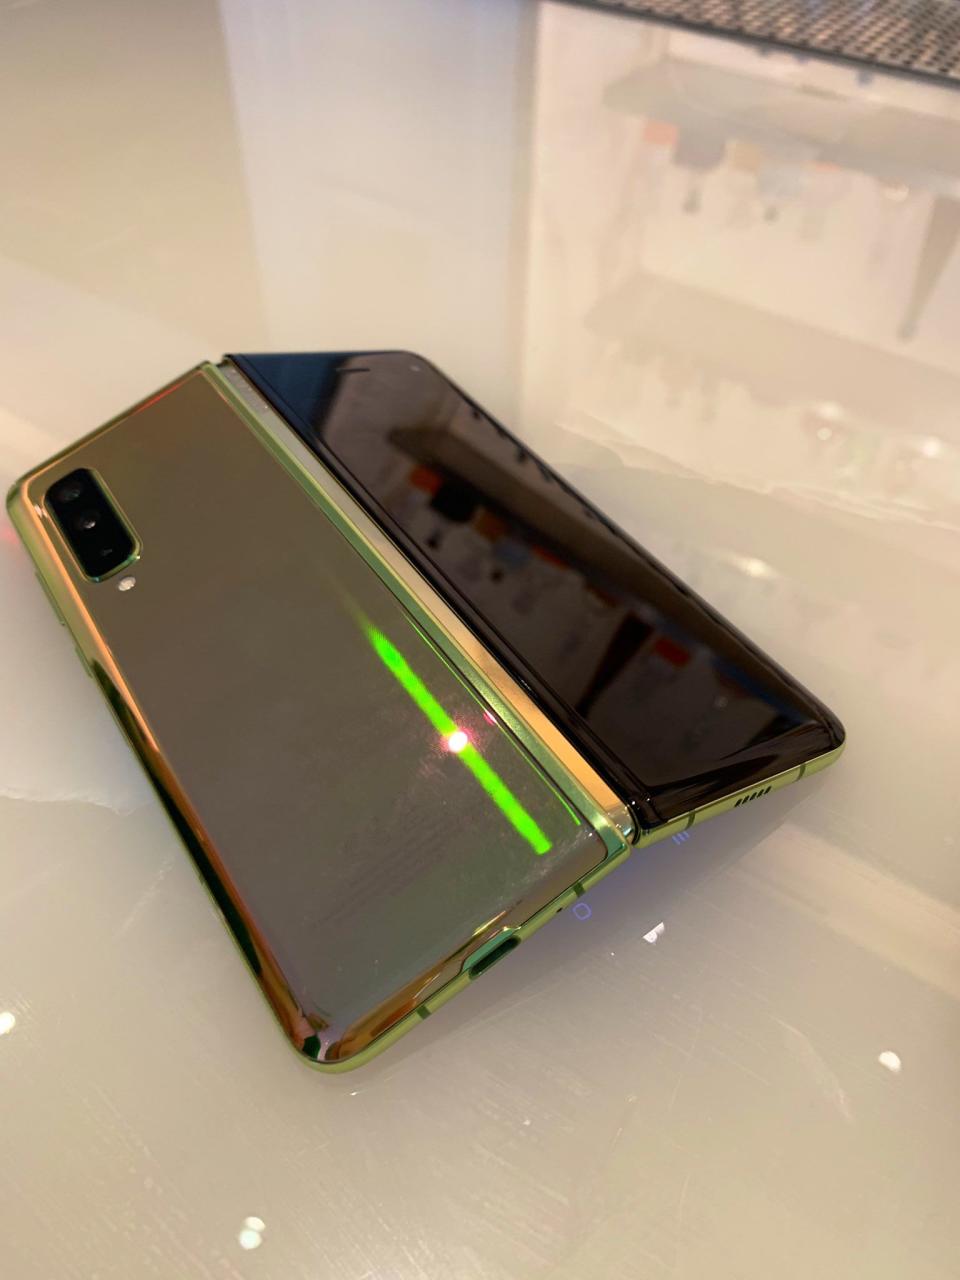 The back of the Galaxy Fold.